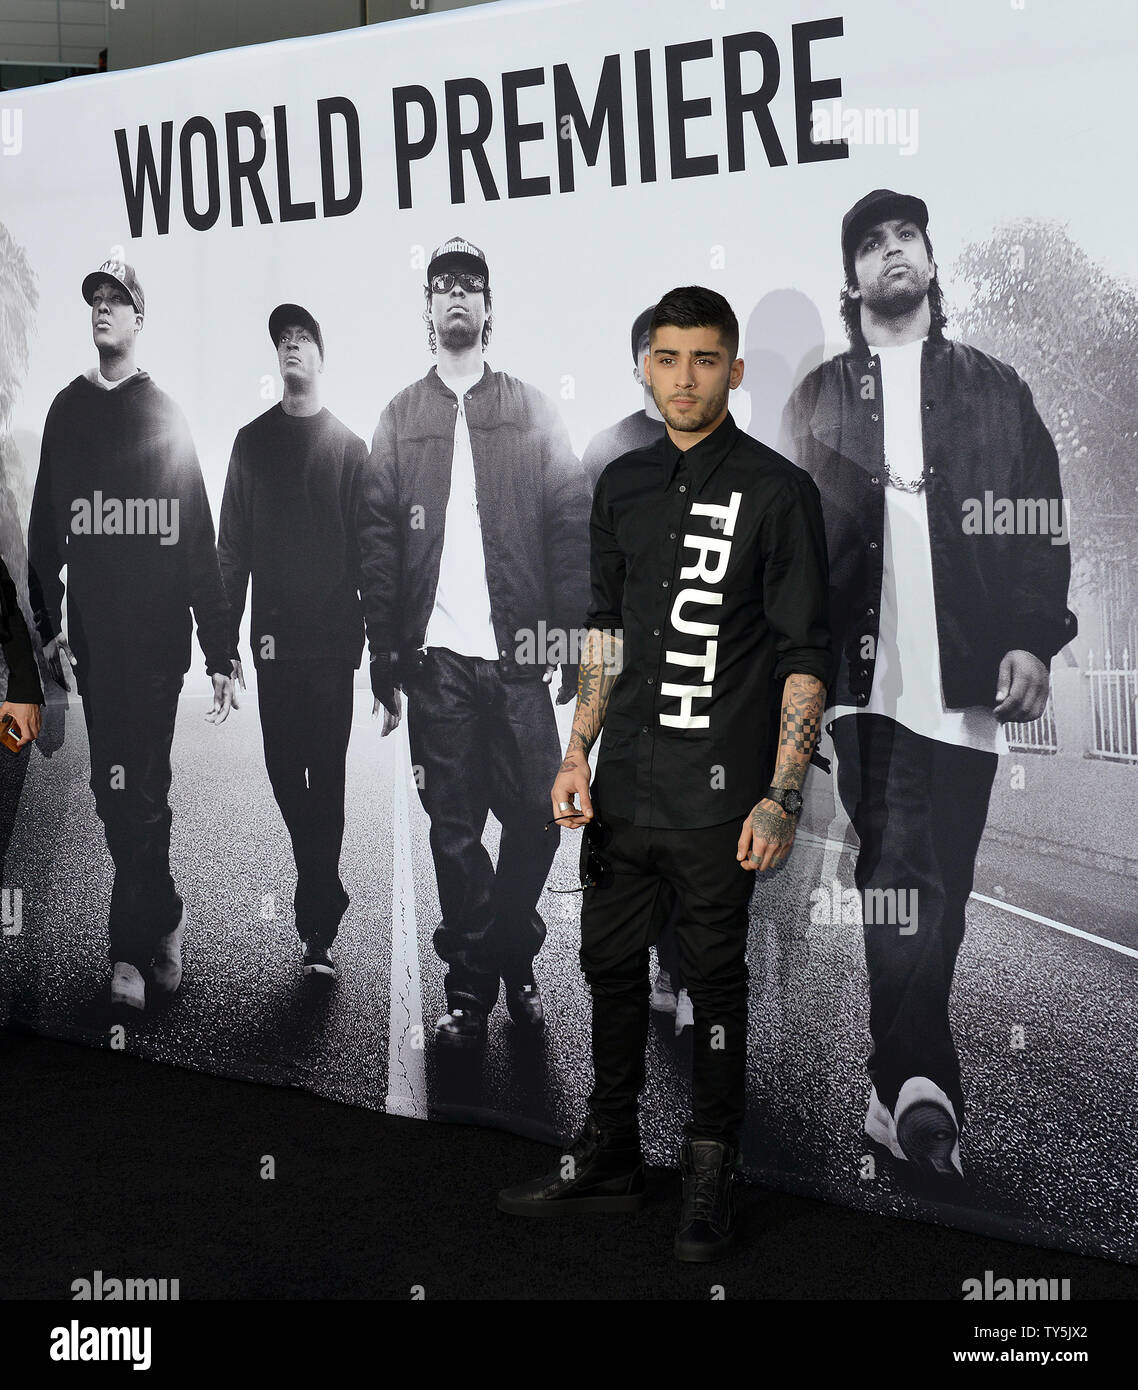 Singer Zayn Malik attends the premiere of the N.W.A. motion picture biopic 'Straight Outta Compton' at Microsoft Theater in Los Angeles on August 10, 2015. Storyline: The group NWA emerges from the streets of Compton, California in the mid-1980s and revolutionizes Hip Hop culture with their music and tales about life in the hood. Photo by Christine Chew/UPI Stock Photo